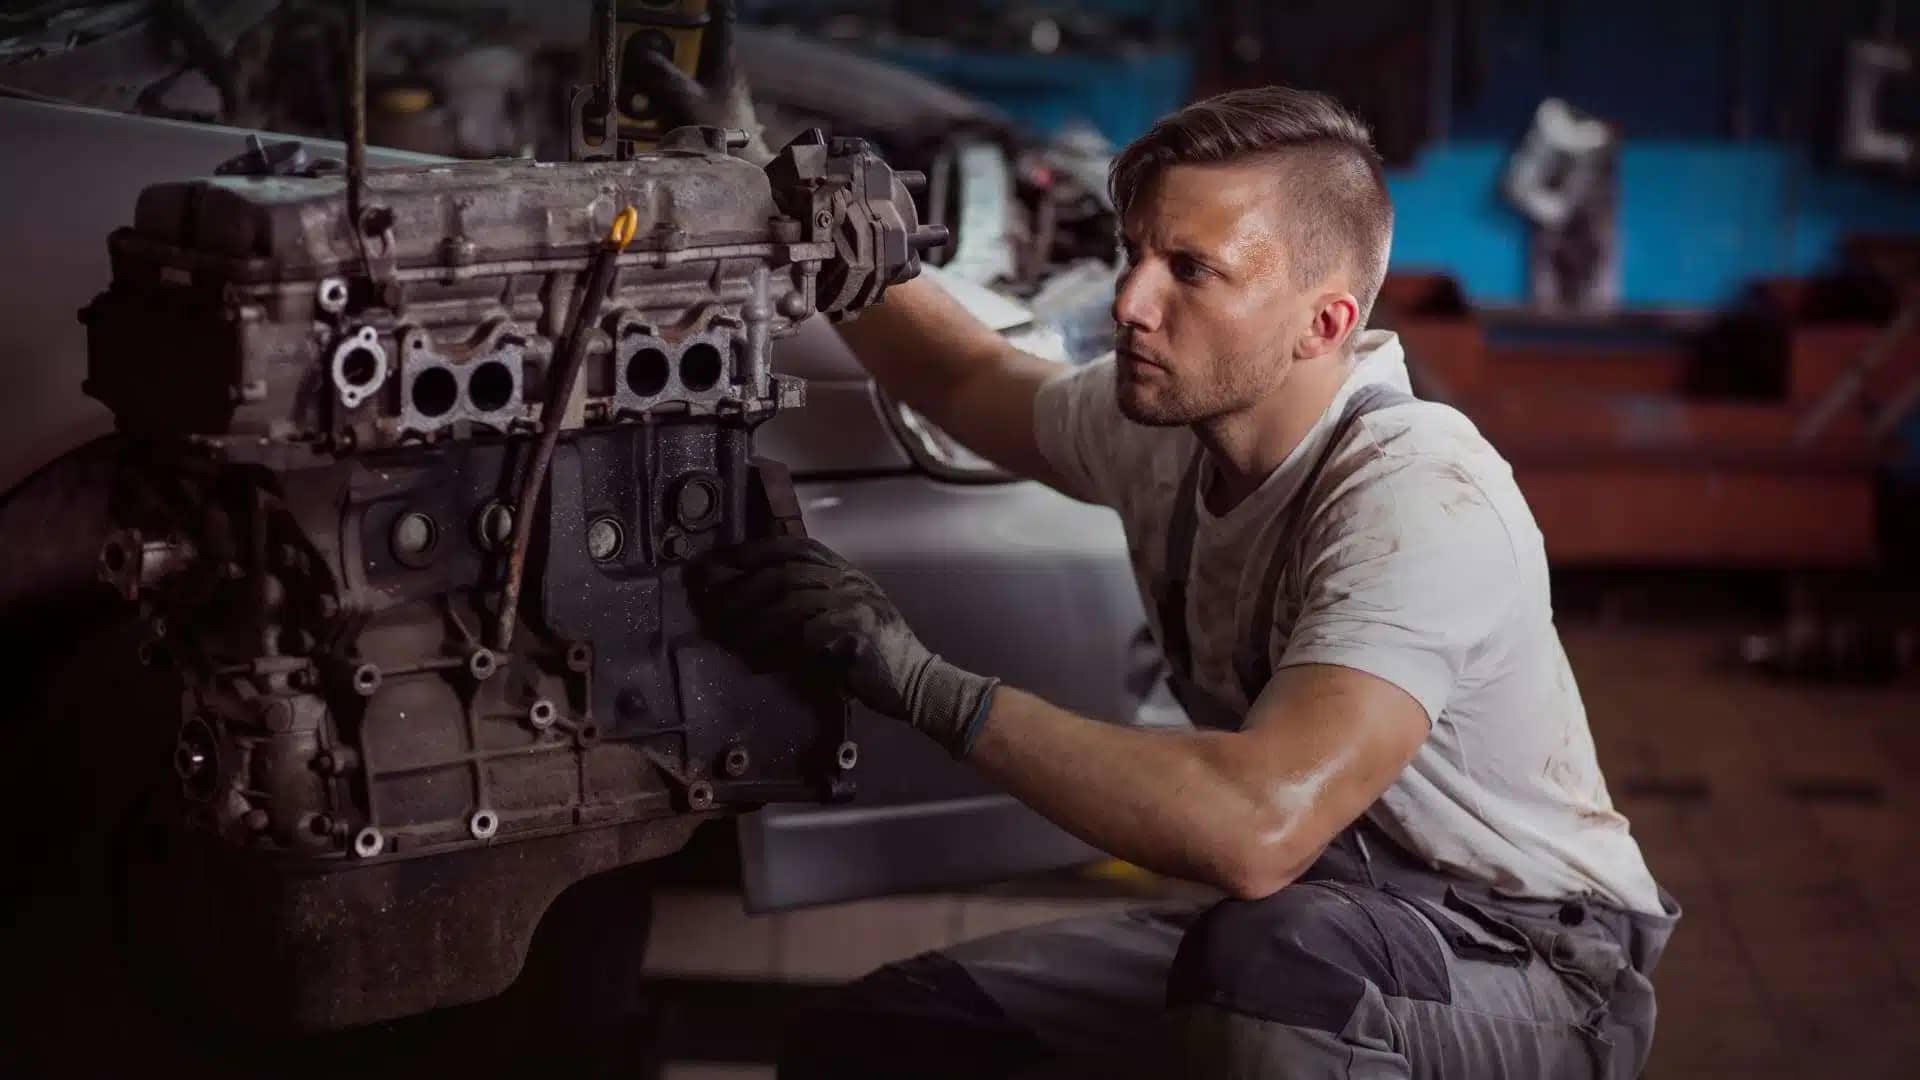 A mechanic inspects a large car engine in a workshop, holding a tool in one hand and focusing intently on his task. the garage is dimly lit with other vehicles in the background.